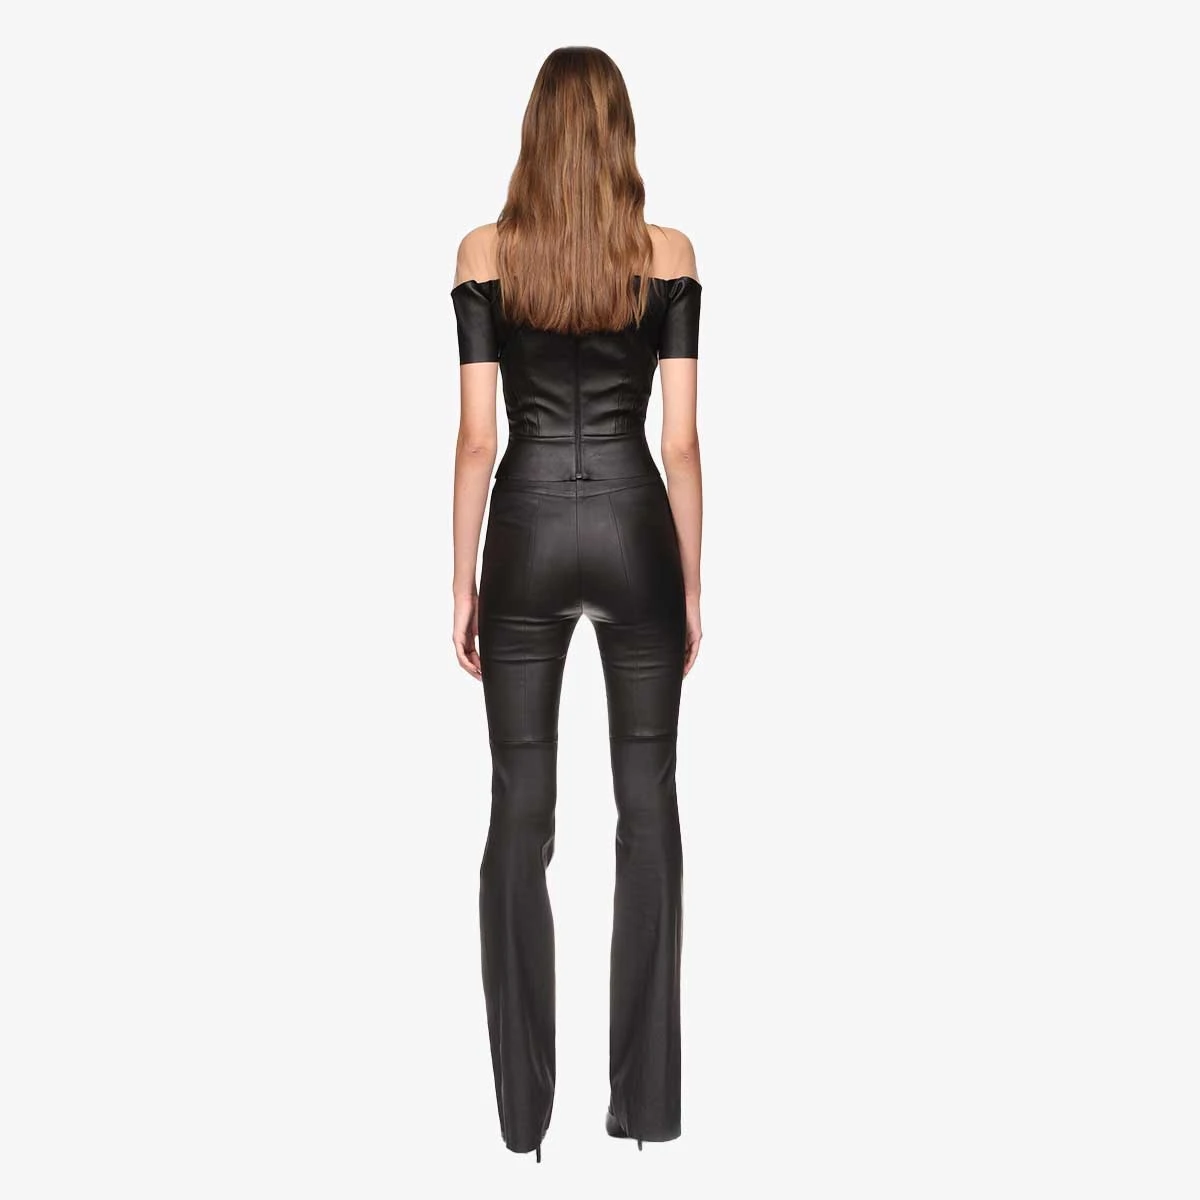 NIKI flared pants in black stretch leather - back view